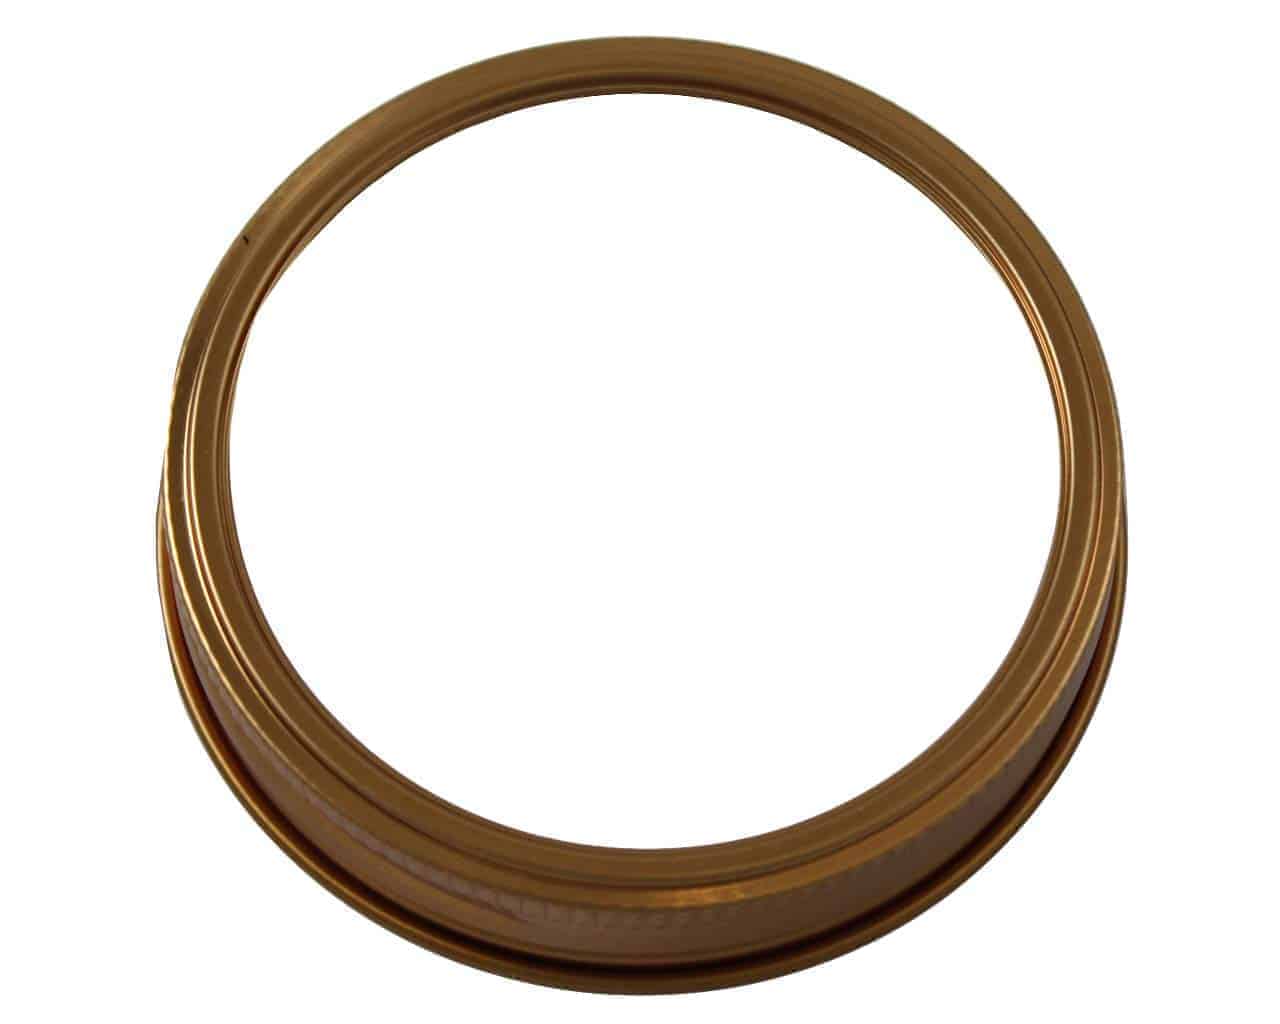 Copper Bands / Rings for Mason Jars 10 pack